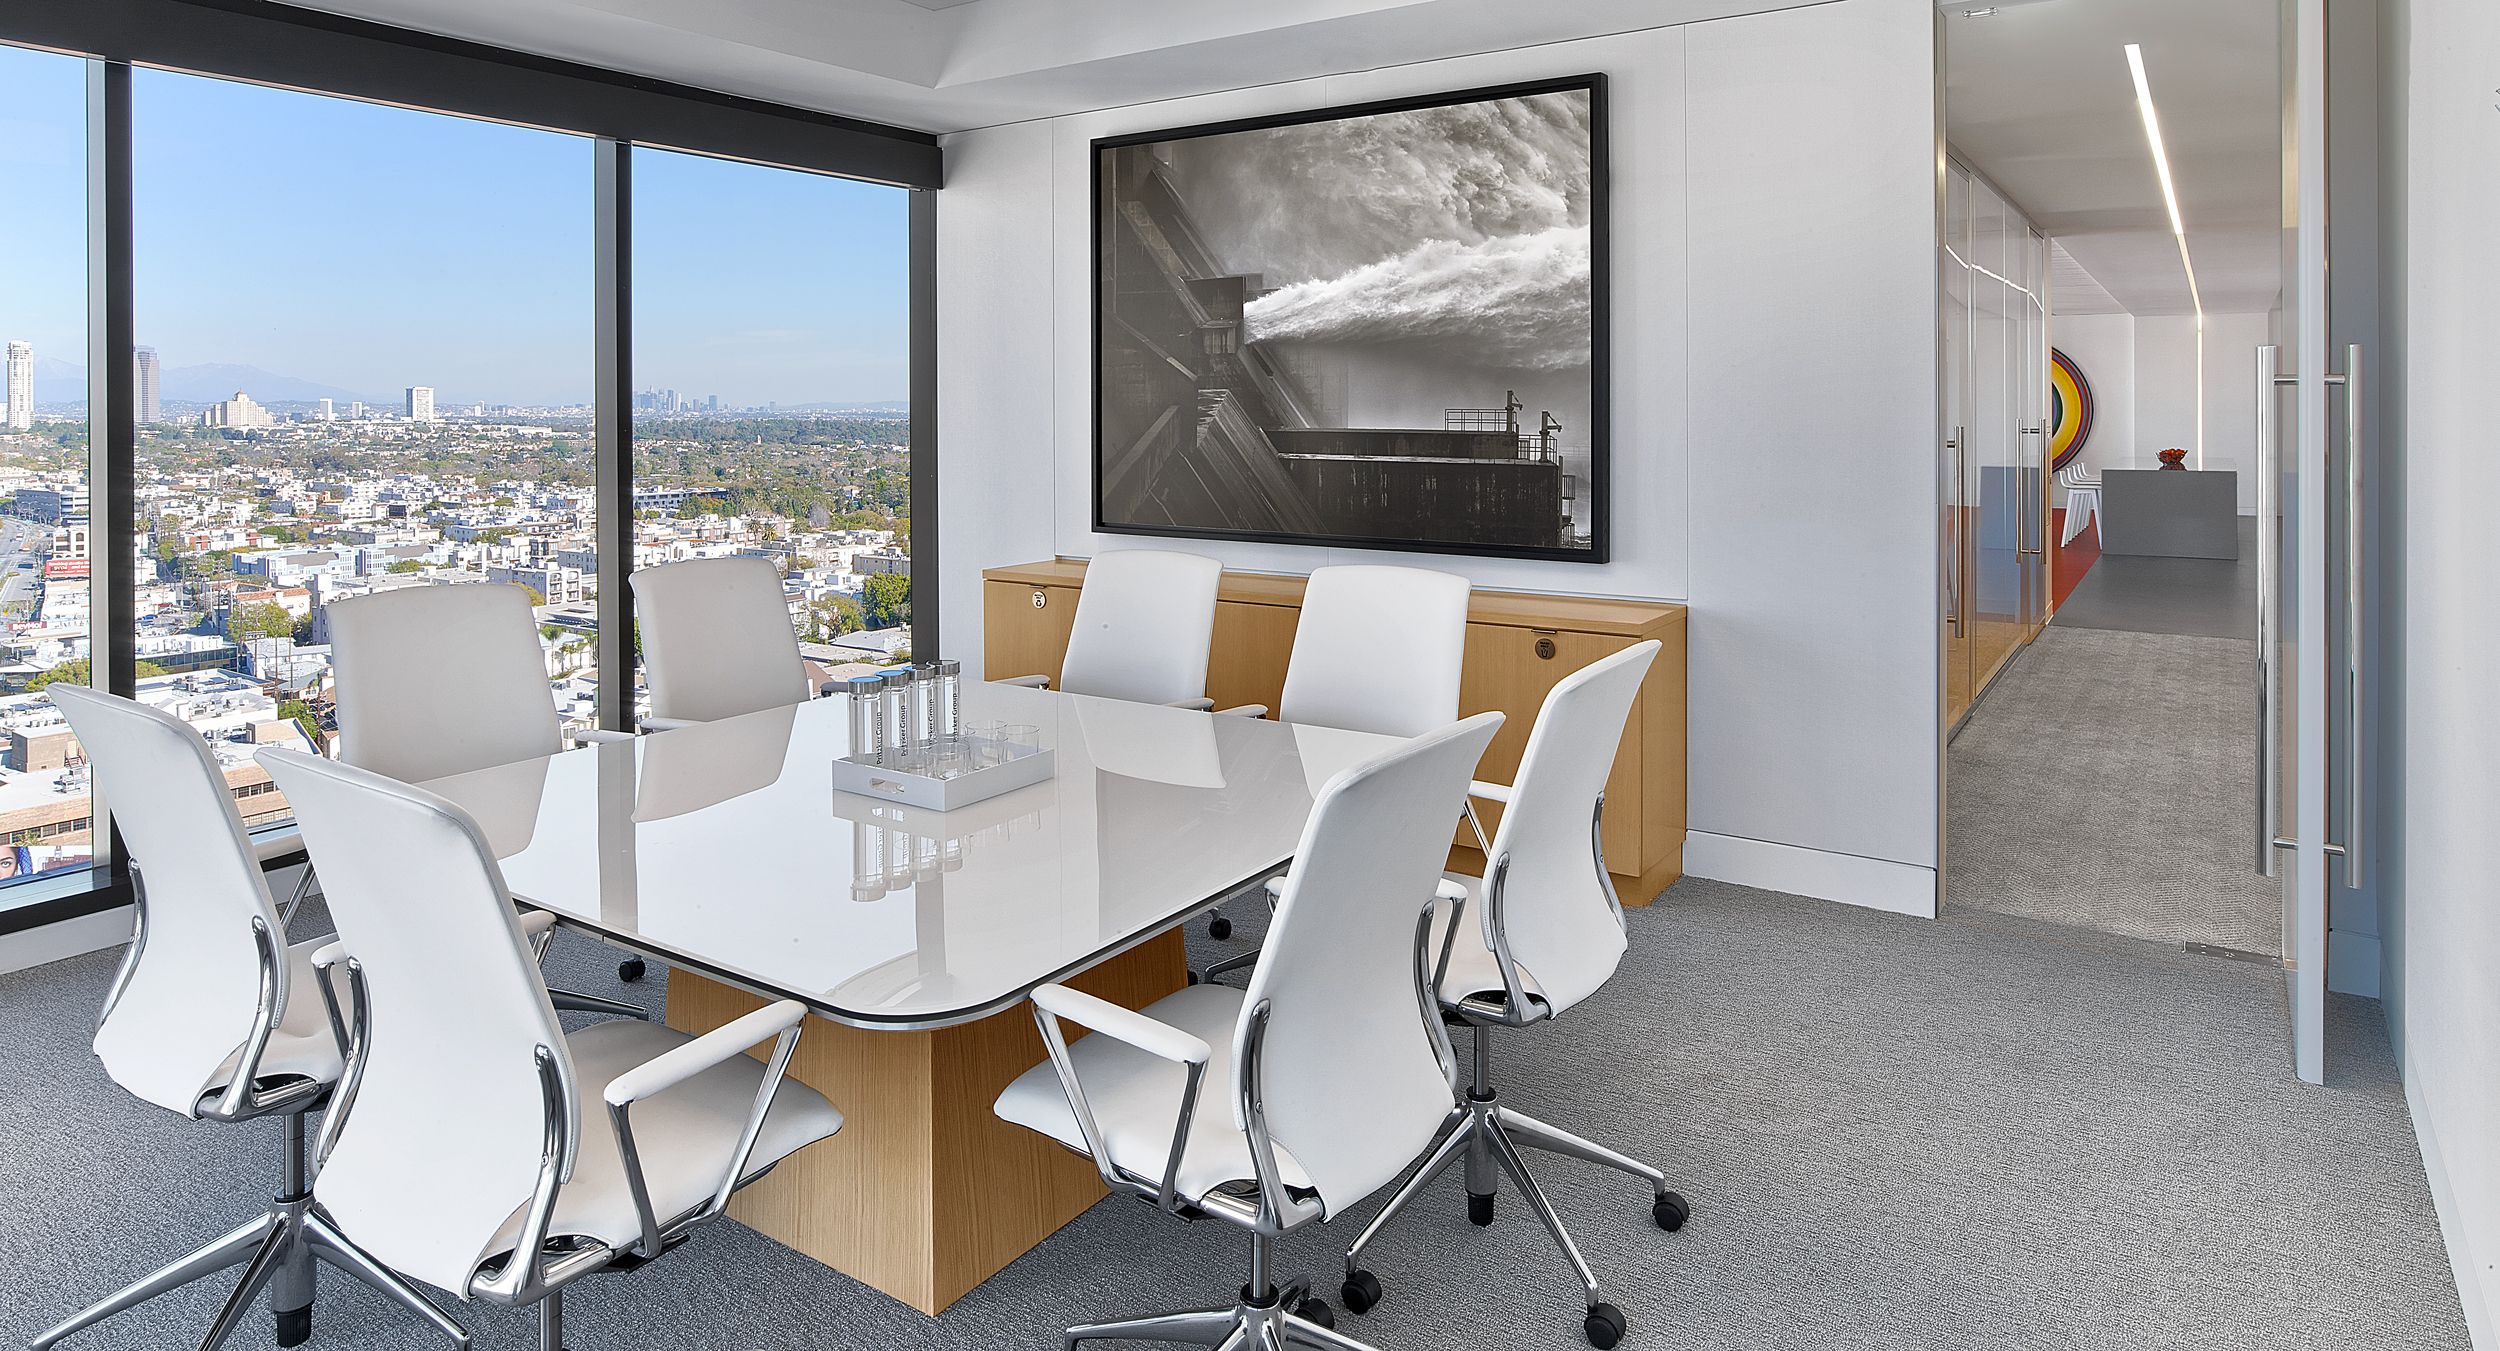 Each MESA table is specified with an Alpine White glass surface, brushed satin aluminum edge, and rift white oak base.